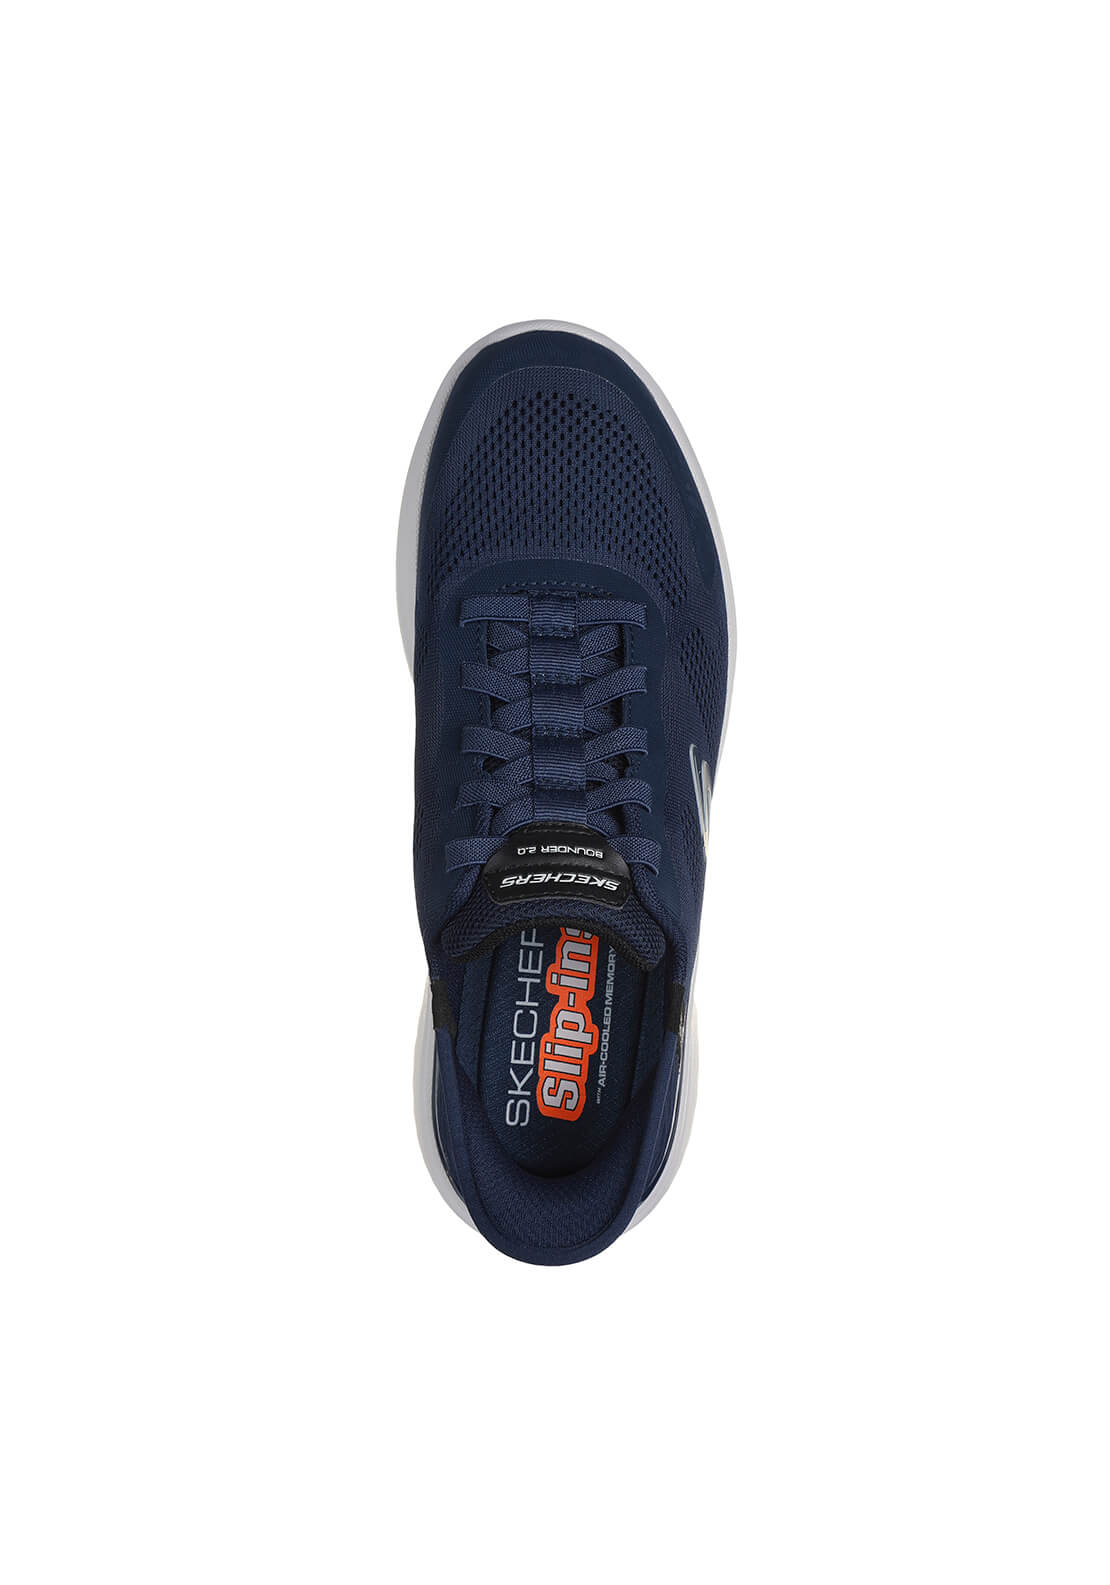 Skechers Bounder 2.0 Emerged - Navy 4 Shaws Department Stores